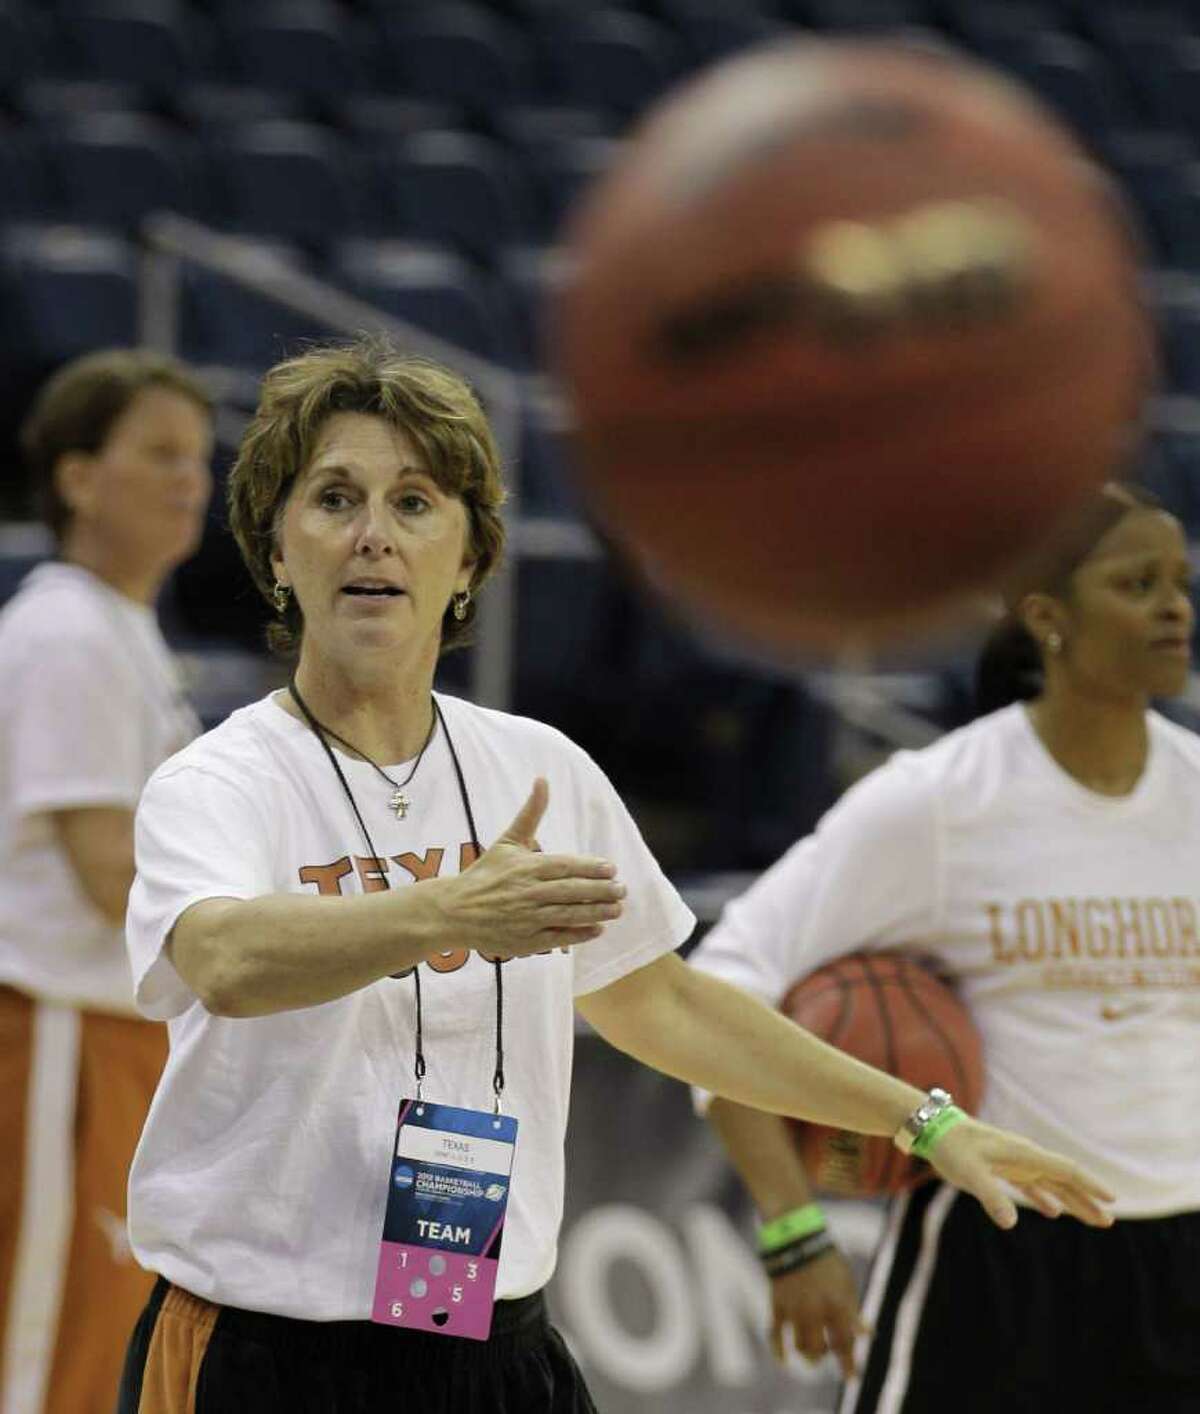 Texas head coach Gail Goestenkors directs her team during practice in Norfolk, Va., Friday, March 16, 2012. Texas plays West Virginia in an NCAA tournament first-round women's college basketball game on Saturday. (AP Photo/Steve Helber)